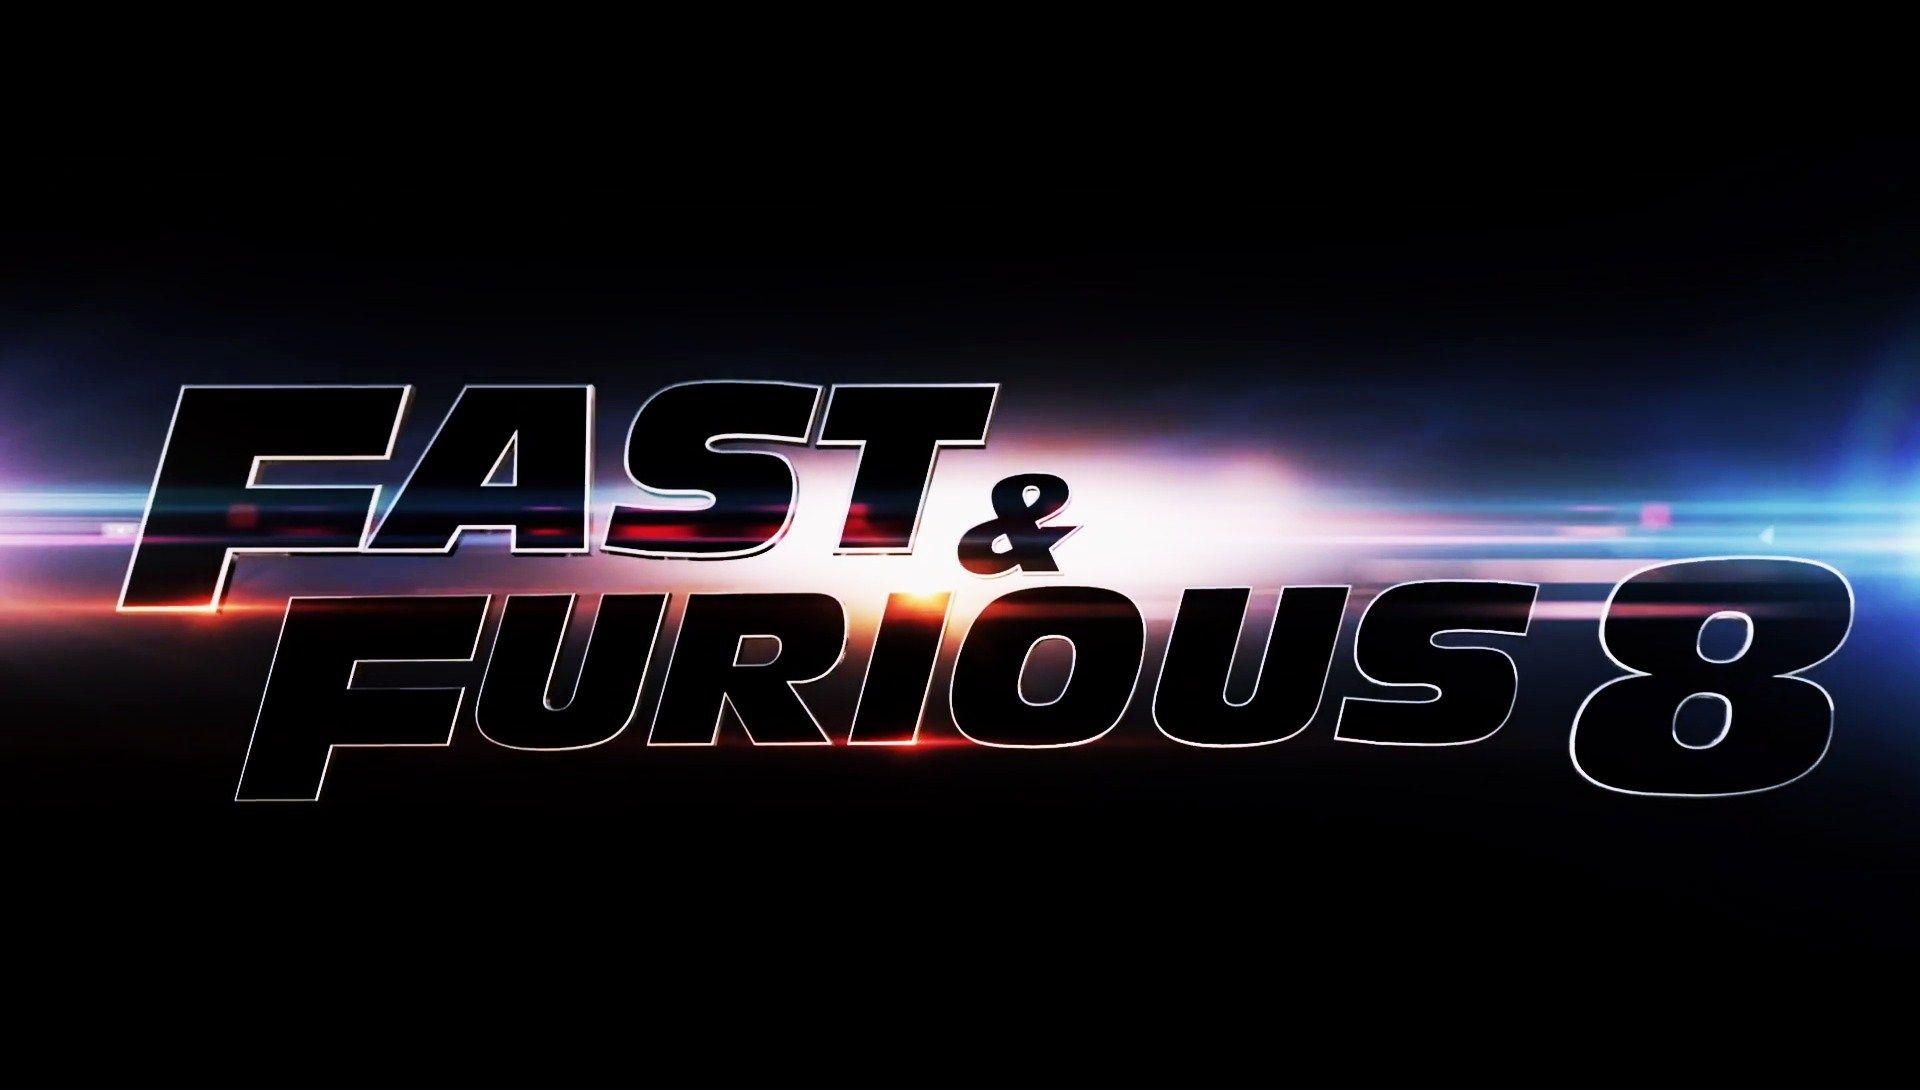 Fast and Furious 8 Logo Wallpaper 61267 1920x1090 px